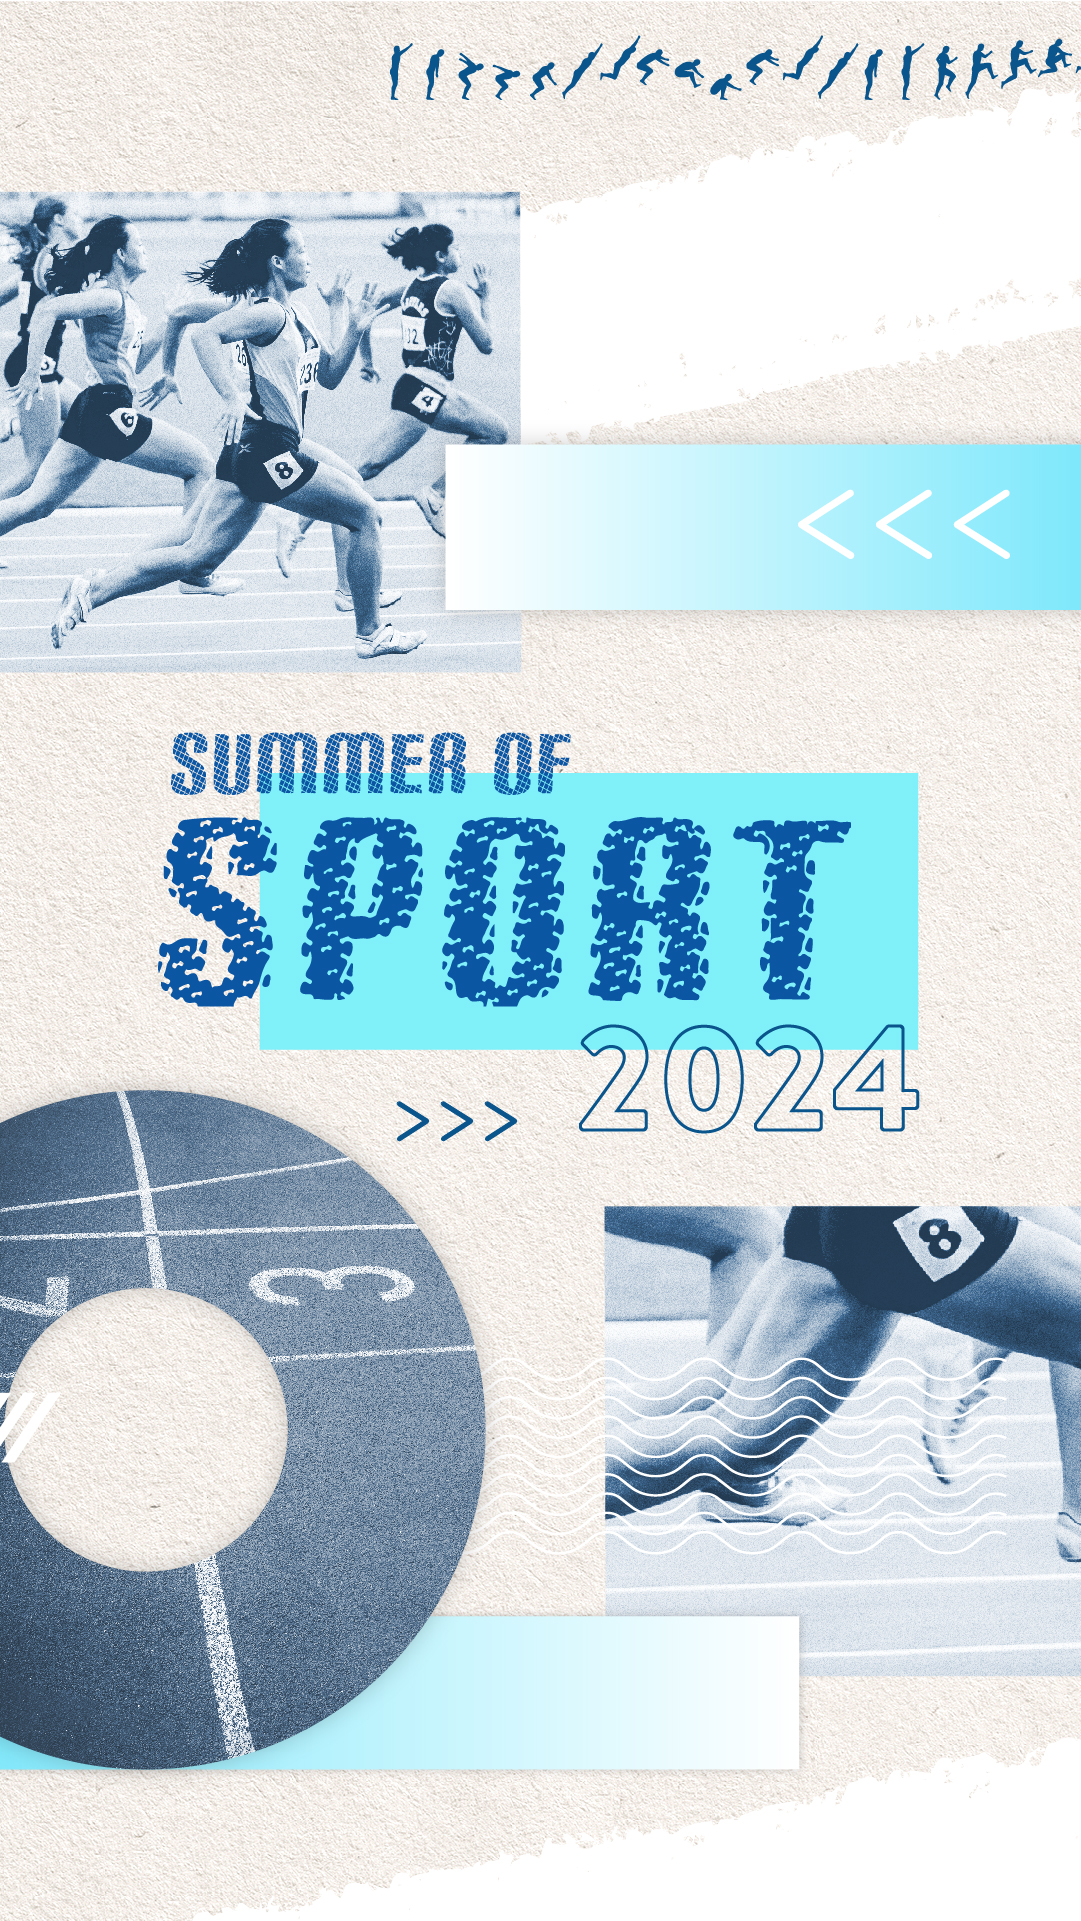 3501_SUMMER-OF-SPORTS_mobile-2